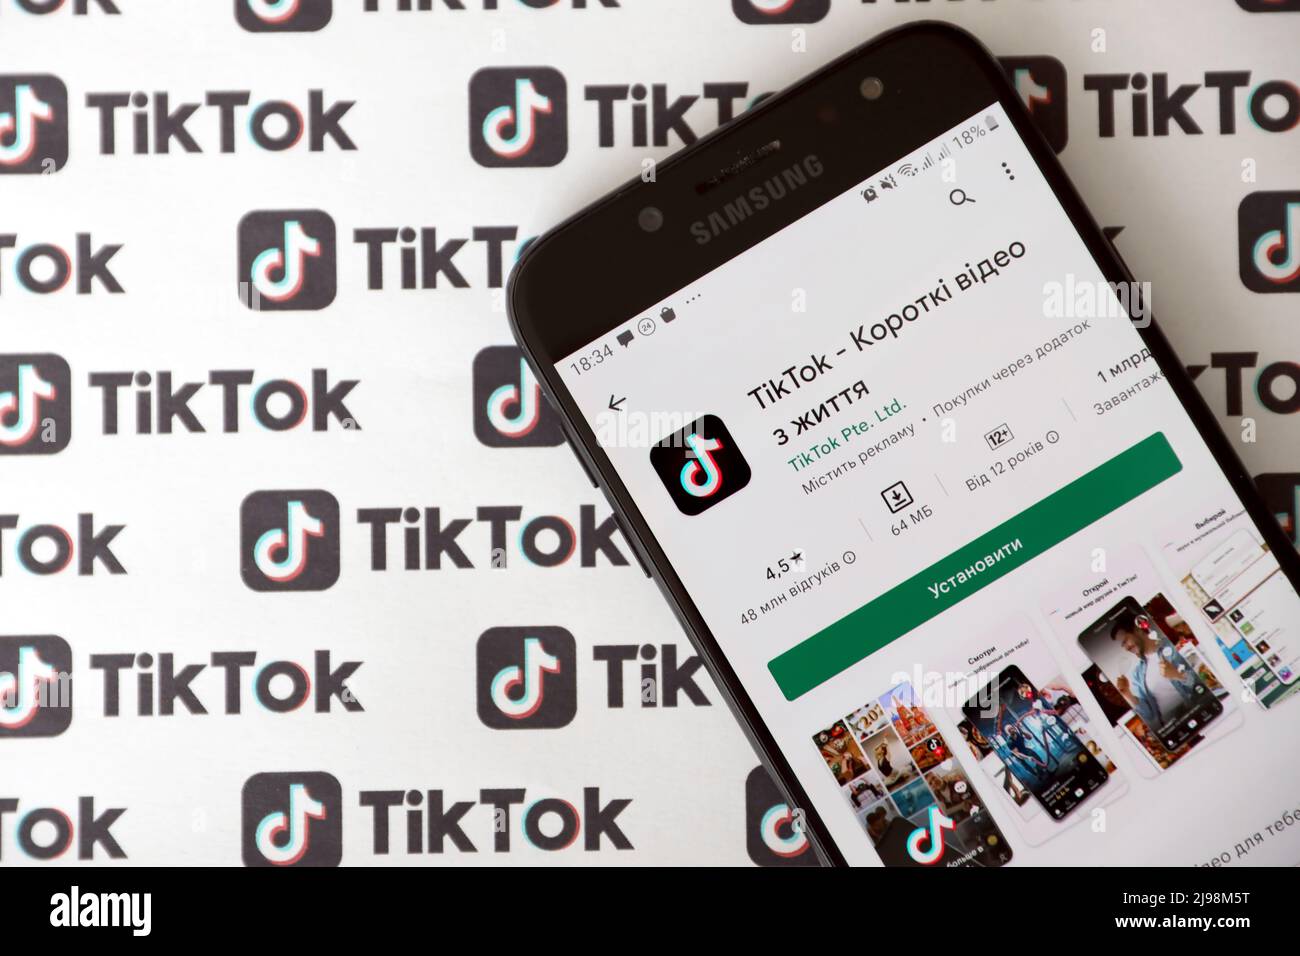 TERNOPIL, UKRAINE - MAY 2, 2022: Tik Tok smartphone app on screen and Many TikTok logo printed on paper. Tiktok or Douyin is a famous Chinese short-fo Stock Photo